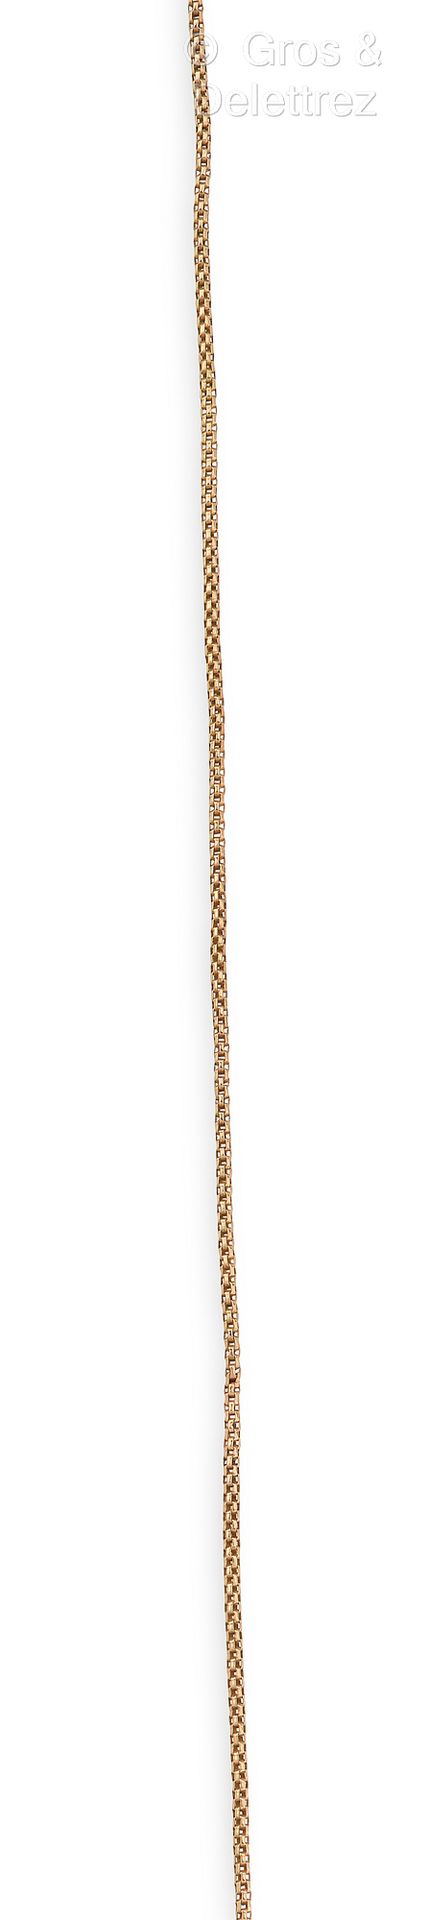 Null Fine chain in yellow gold with Venetian mesh. Length : 78 cm. P. 5,5g.